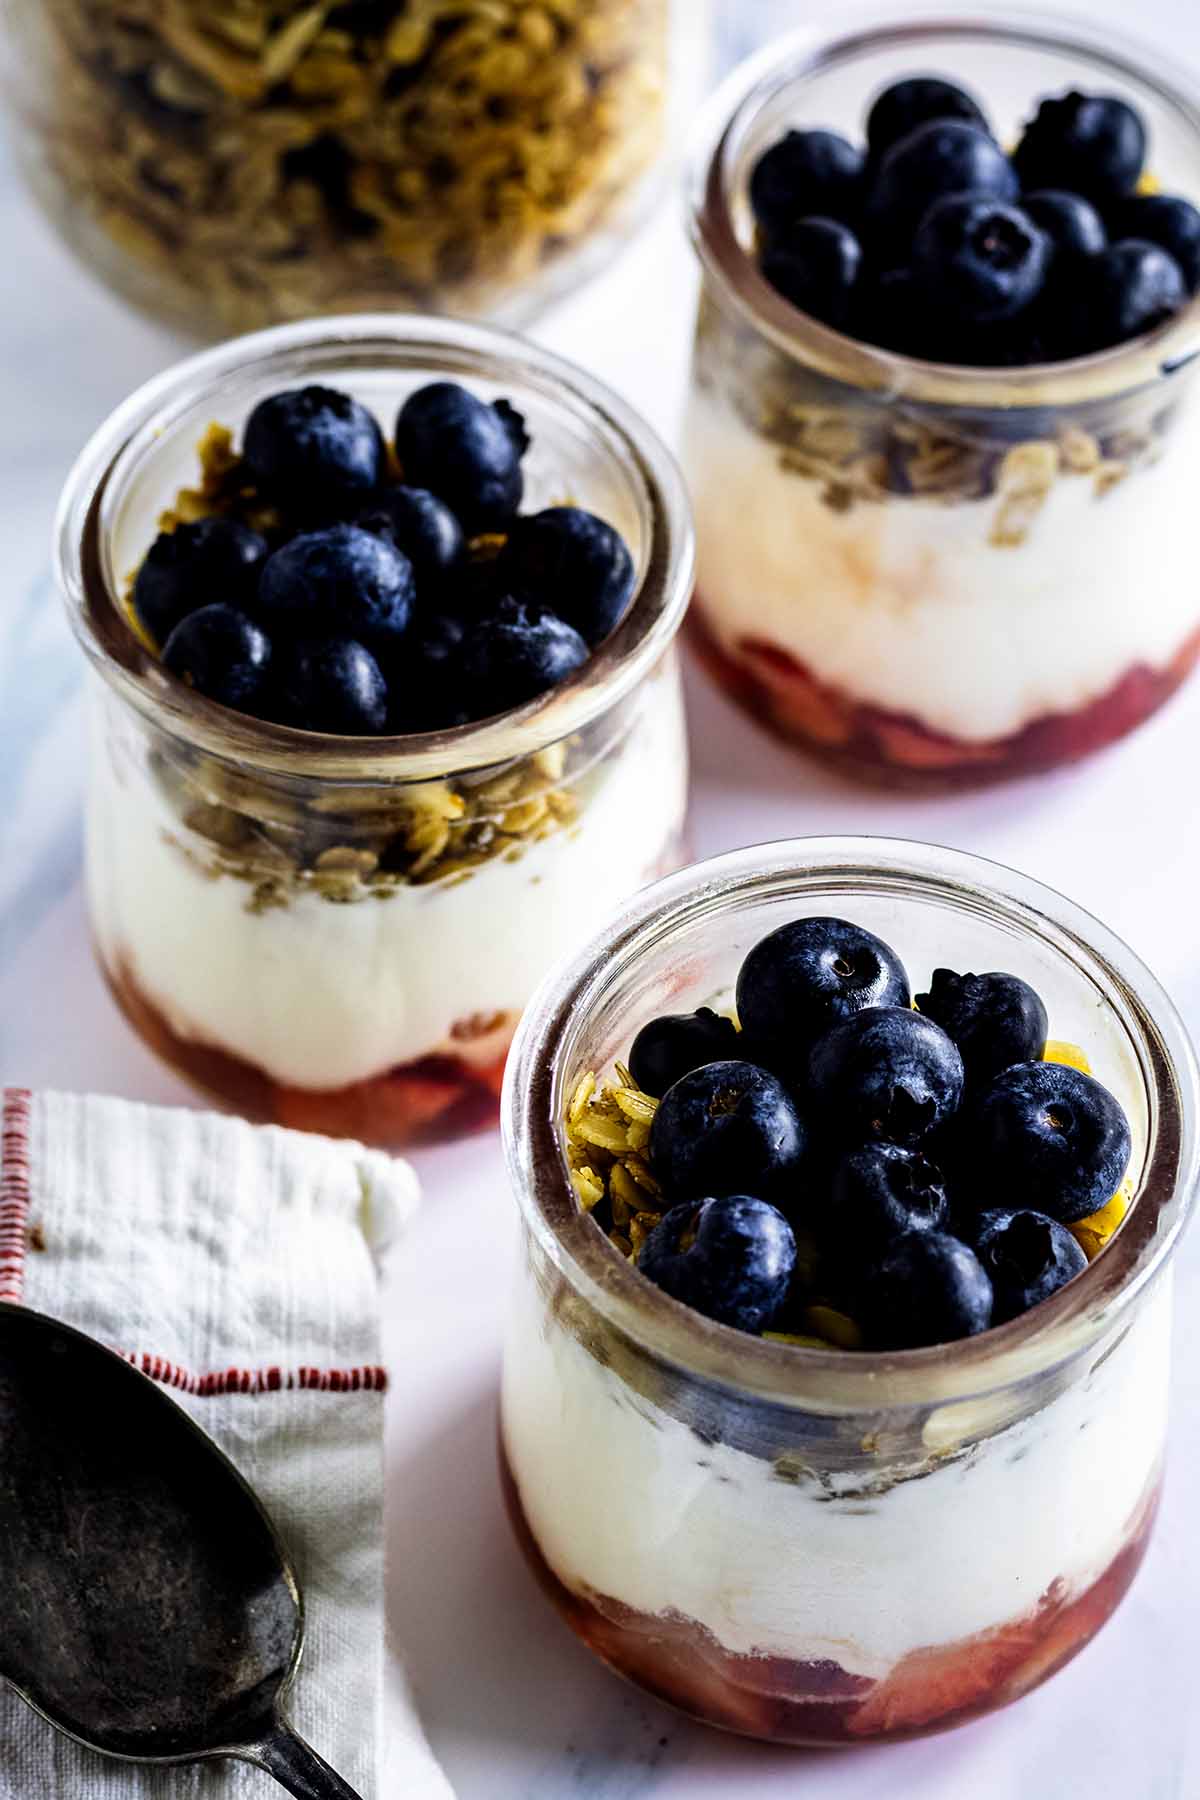 Top view of three finished parfaits in glass jars with a spoon, red and white napkin and granola in a jar